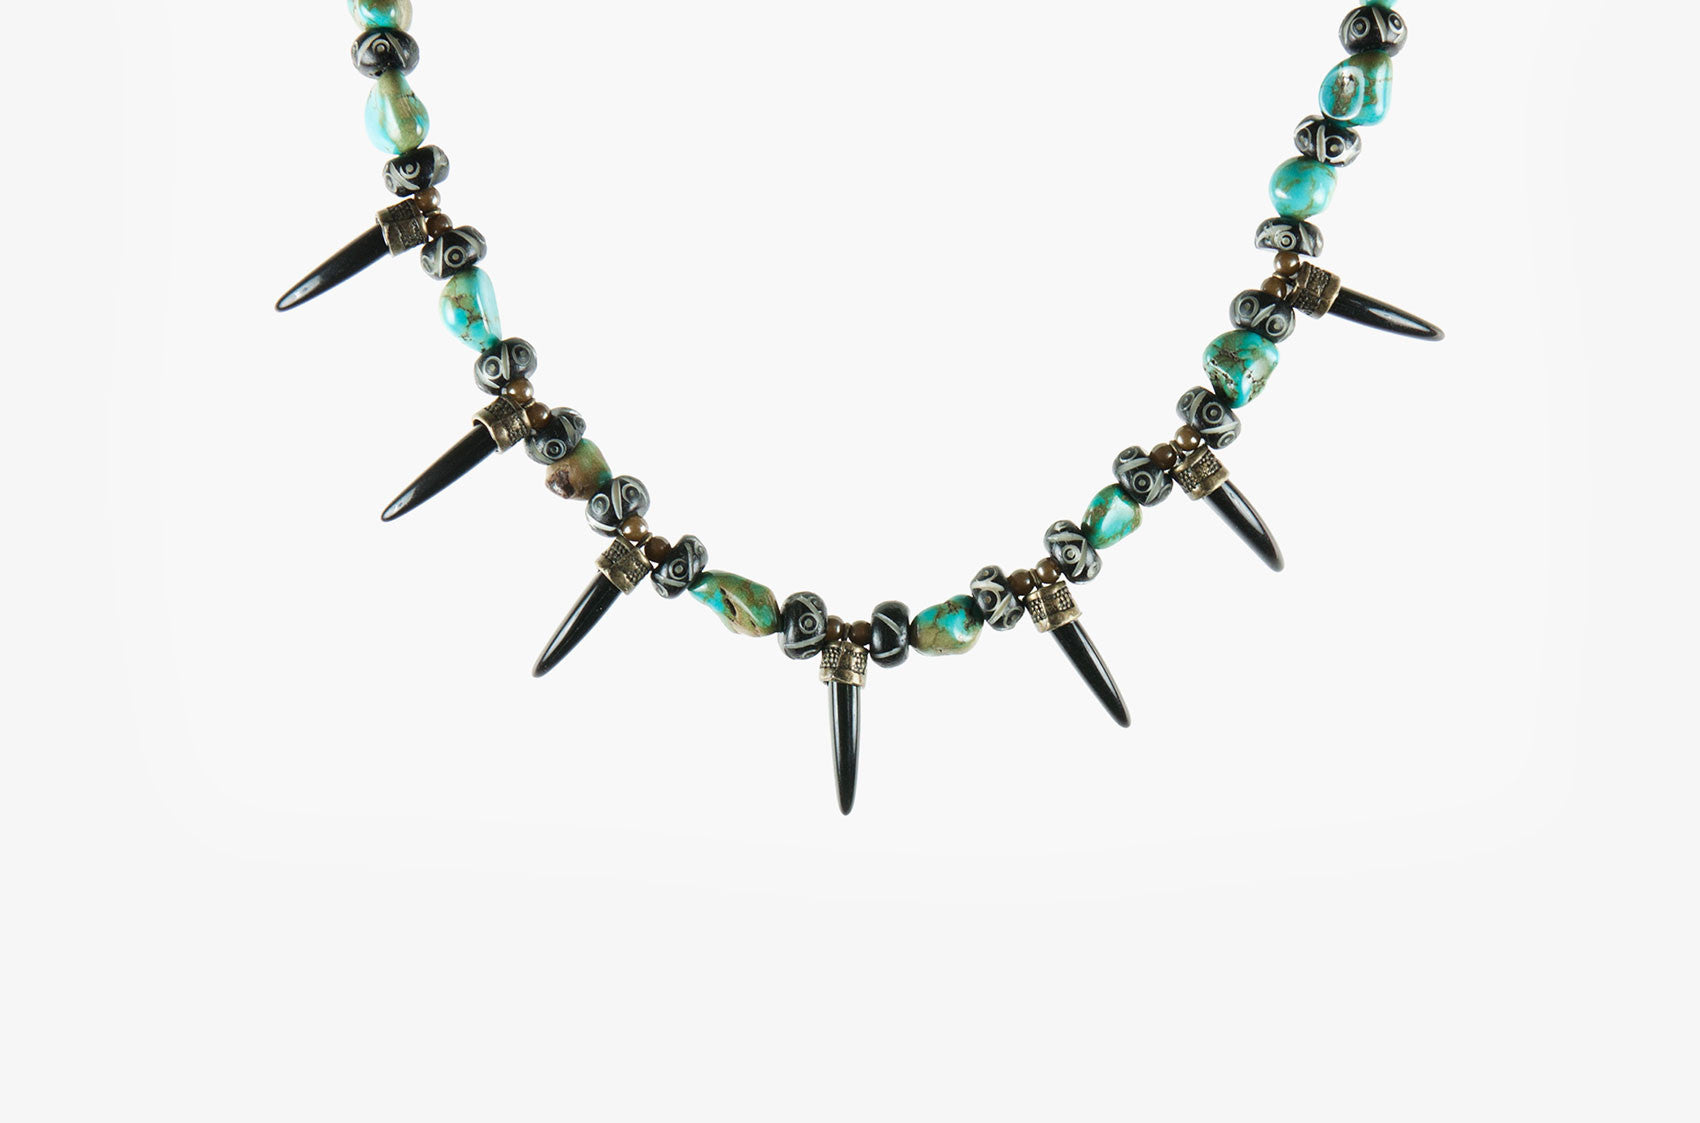 Turquoise and Teeth. Fierce tribal necklace with bone